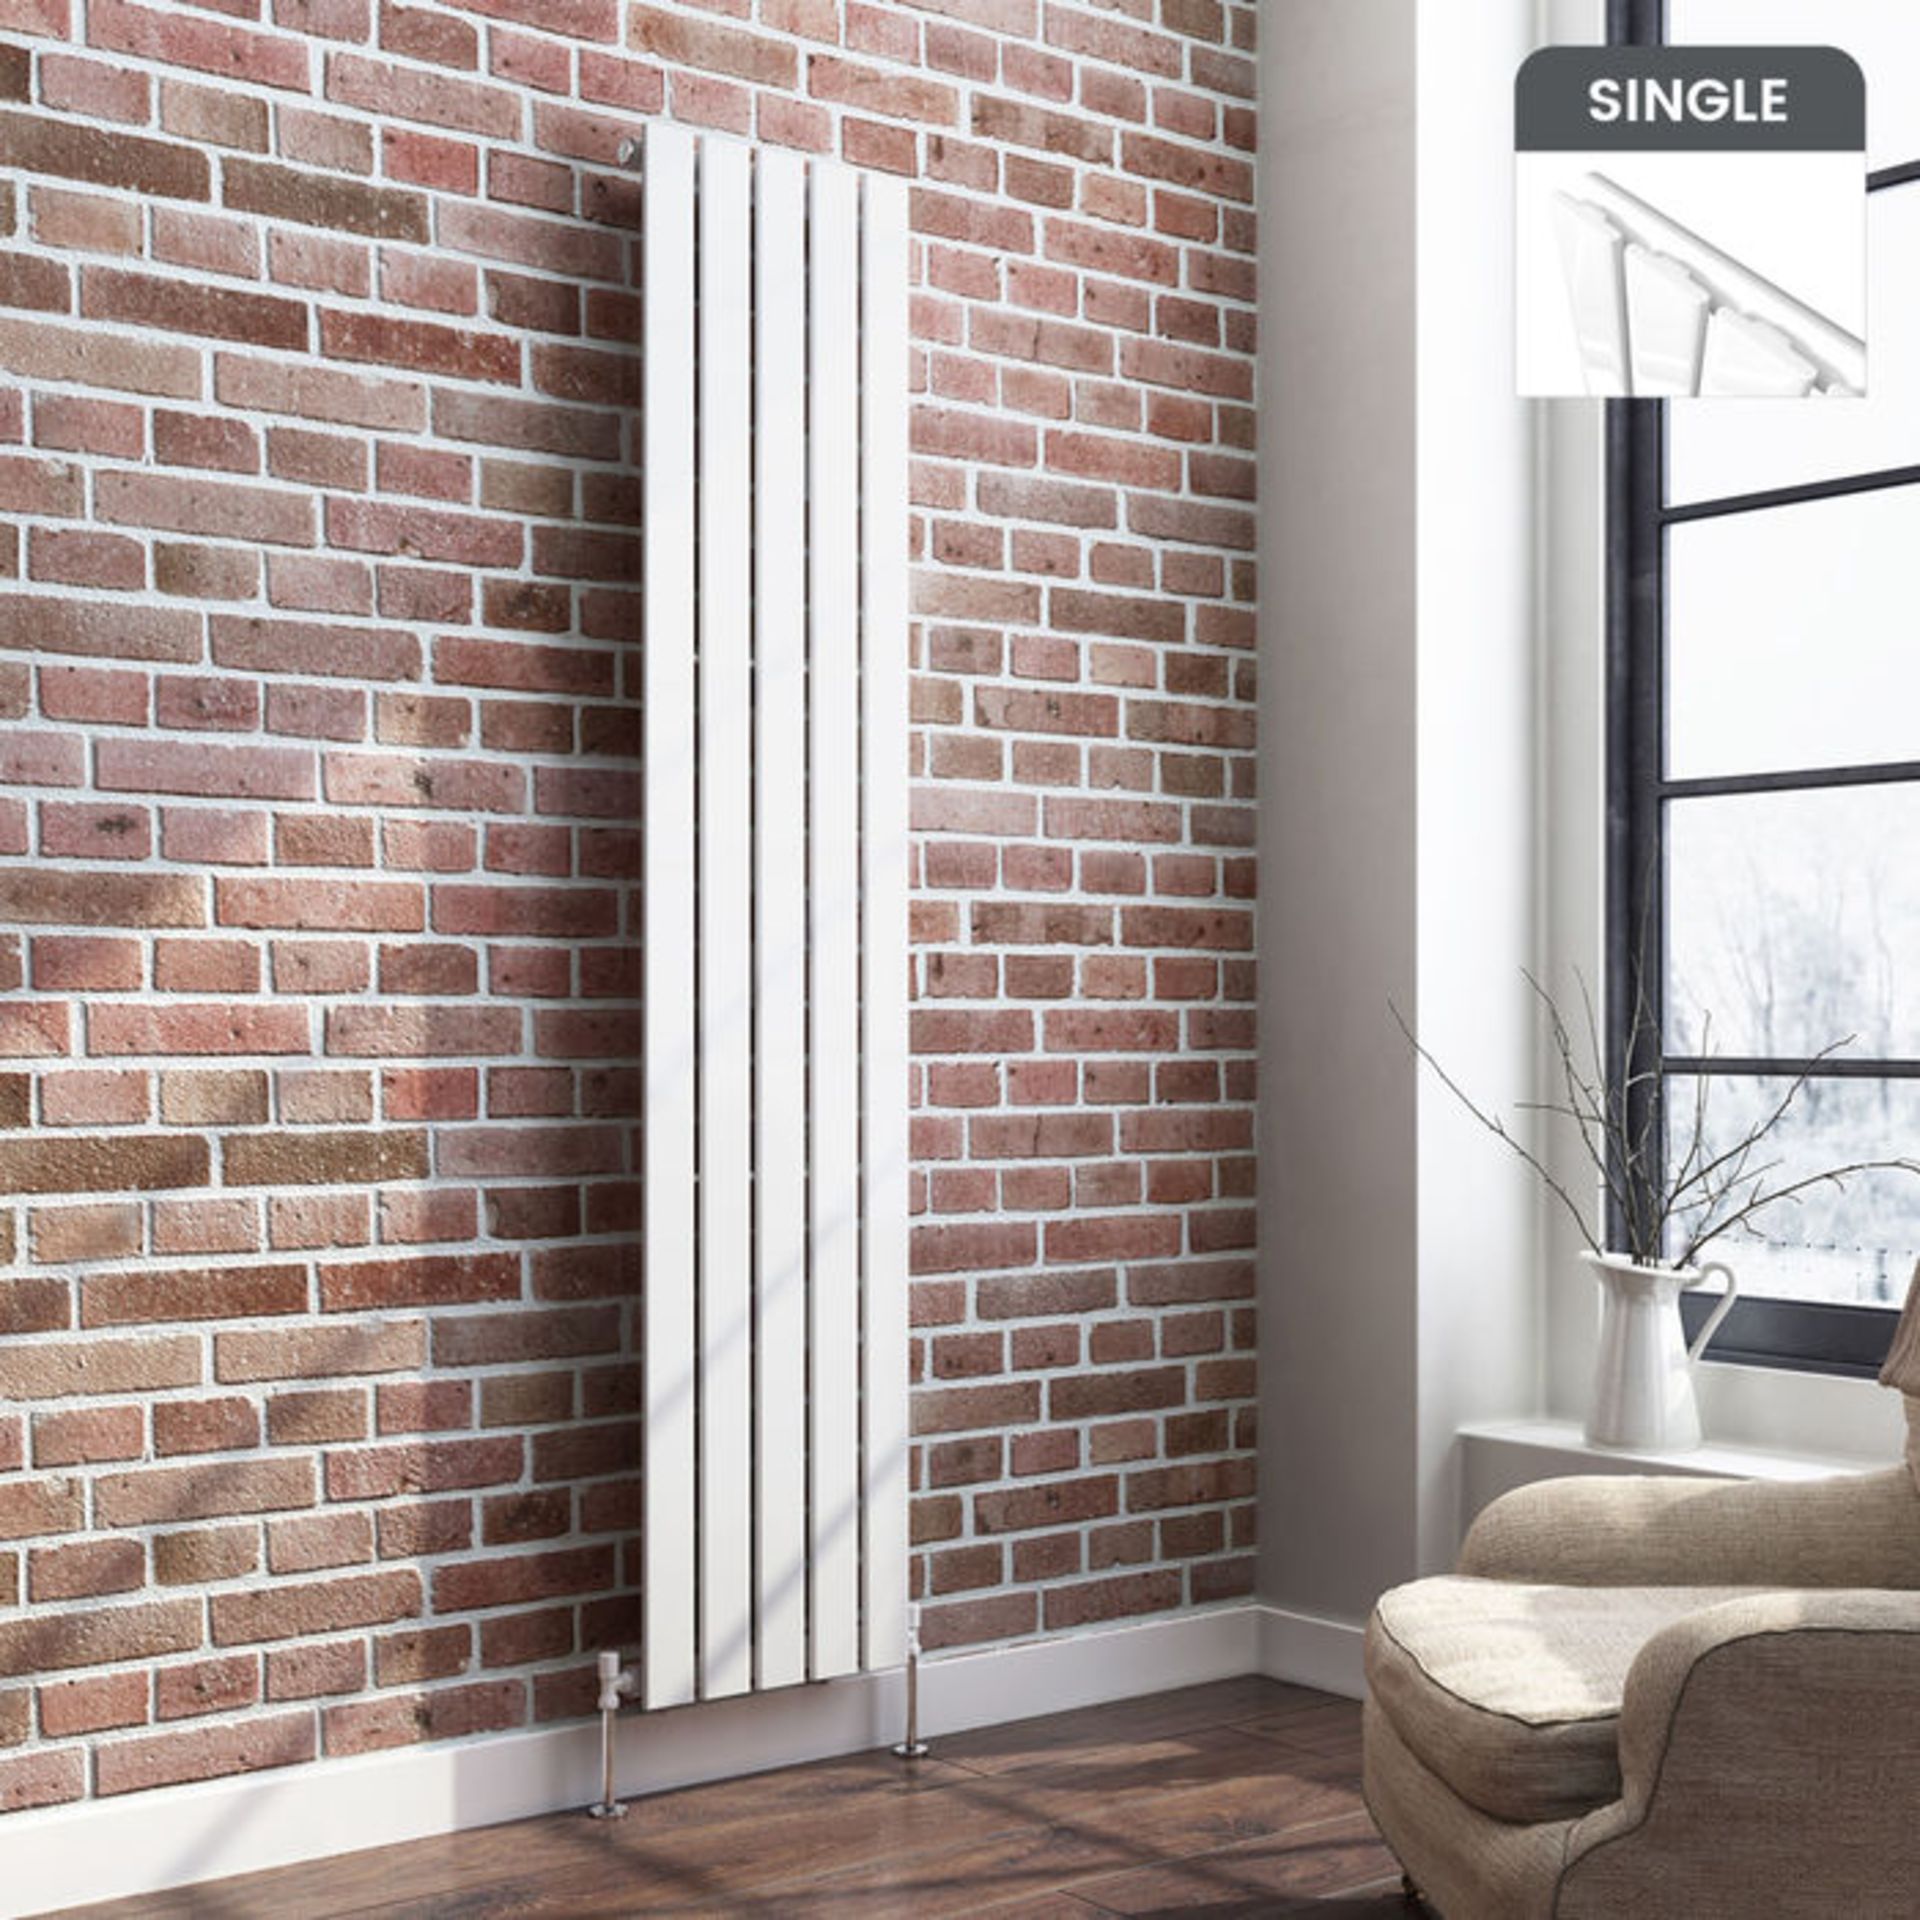 (W50) 1800x376mm Gloss White Single Flat Panel Vertical Radiator. RRP £254.99. Made with low